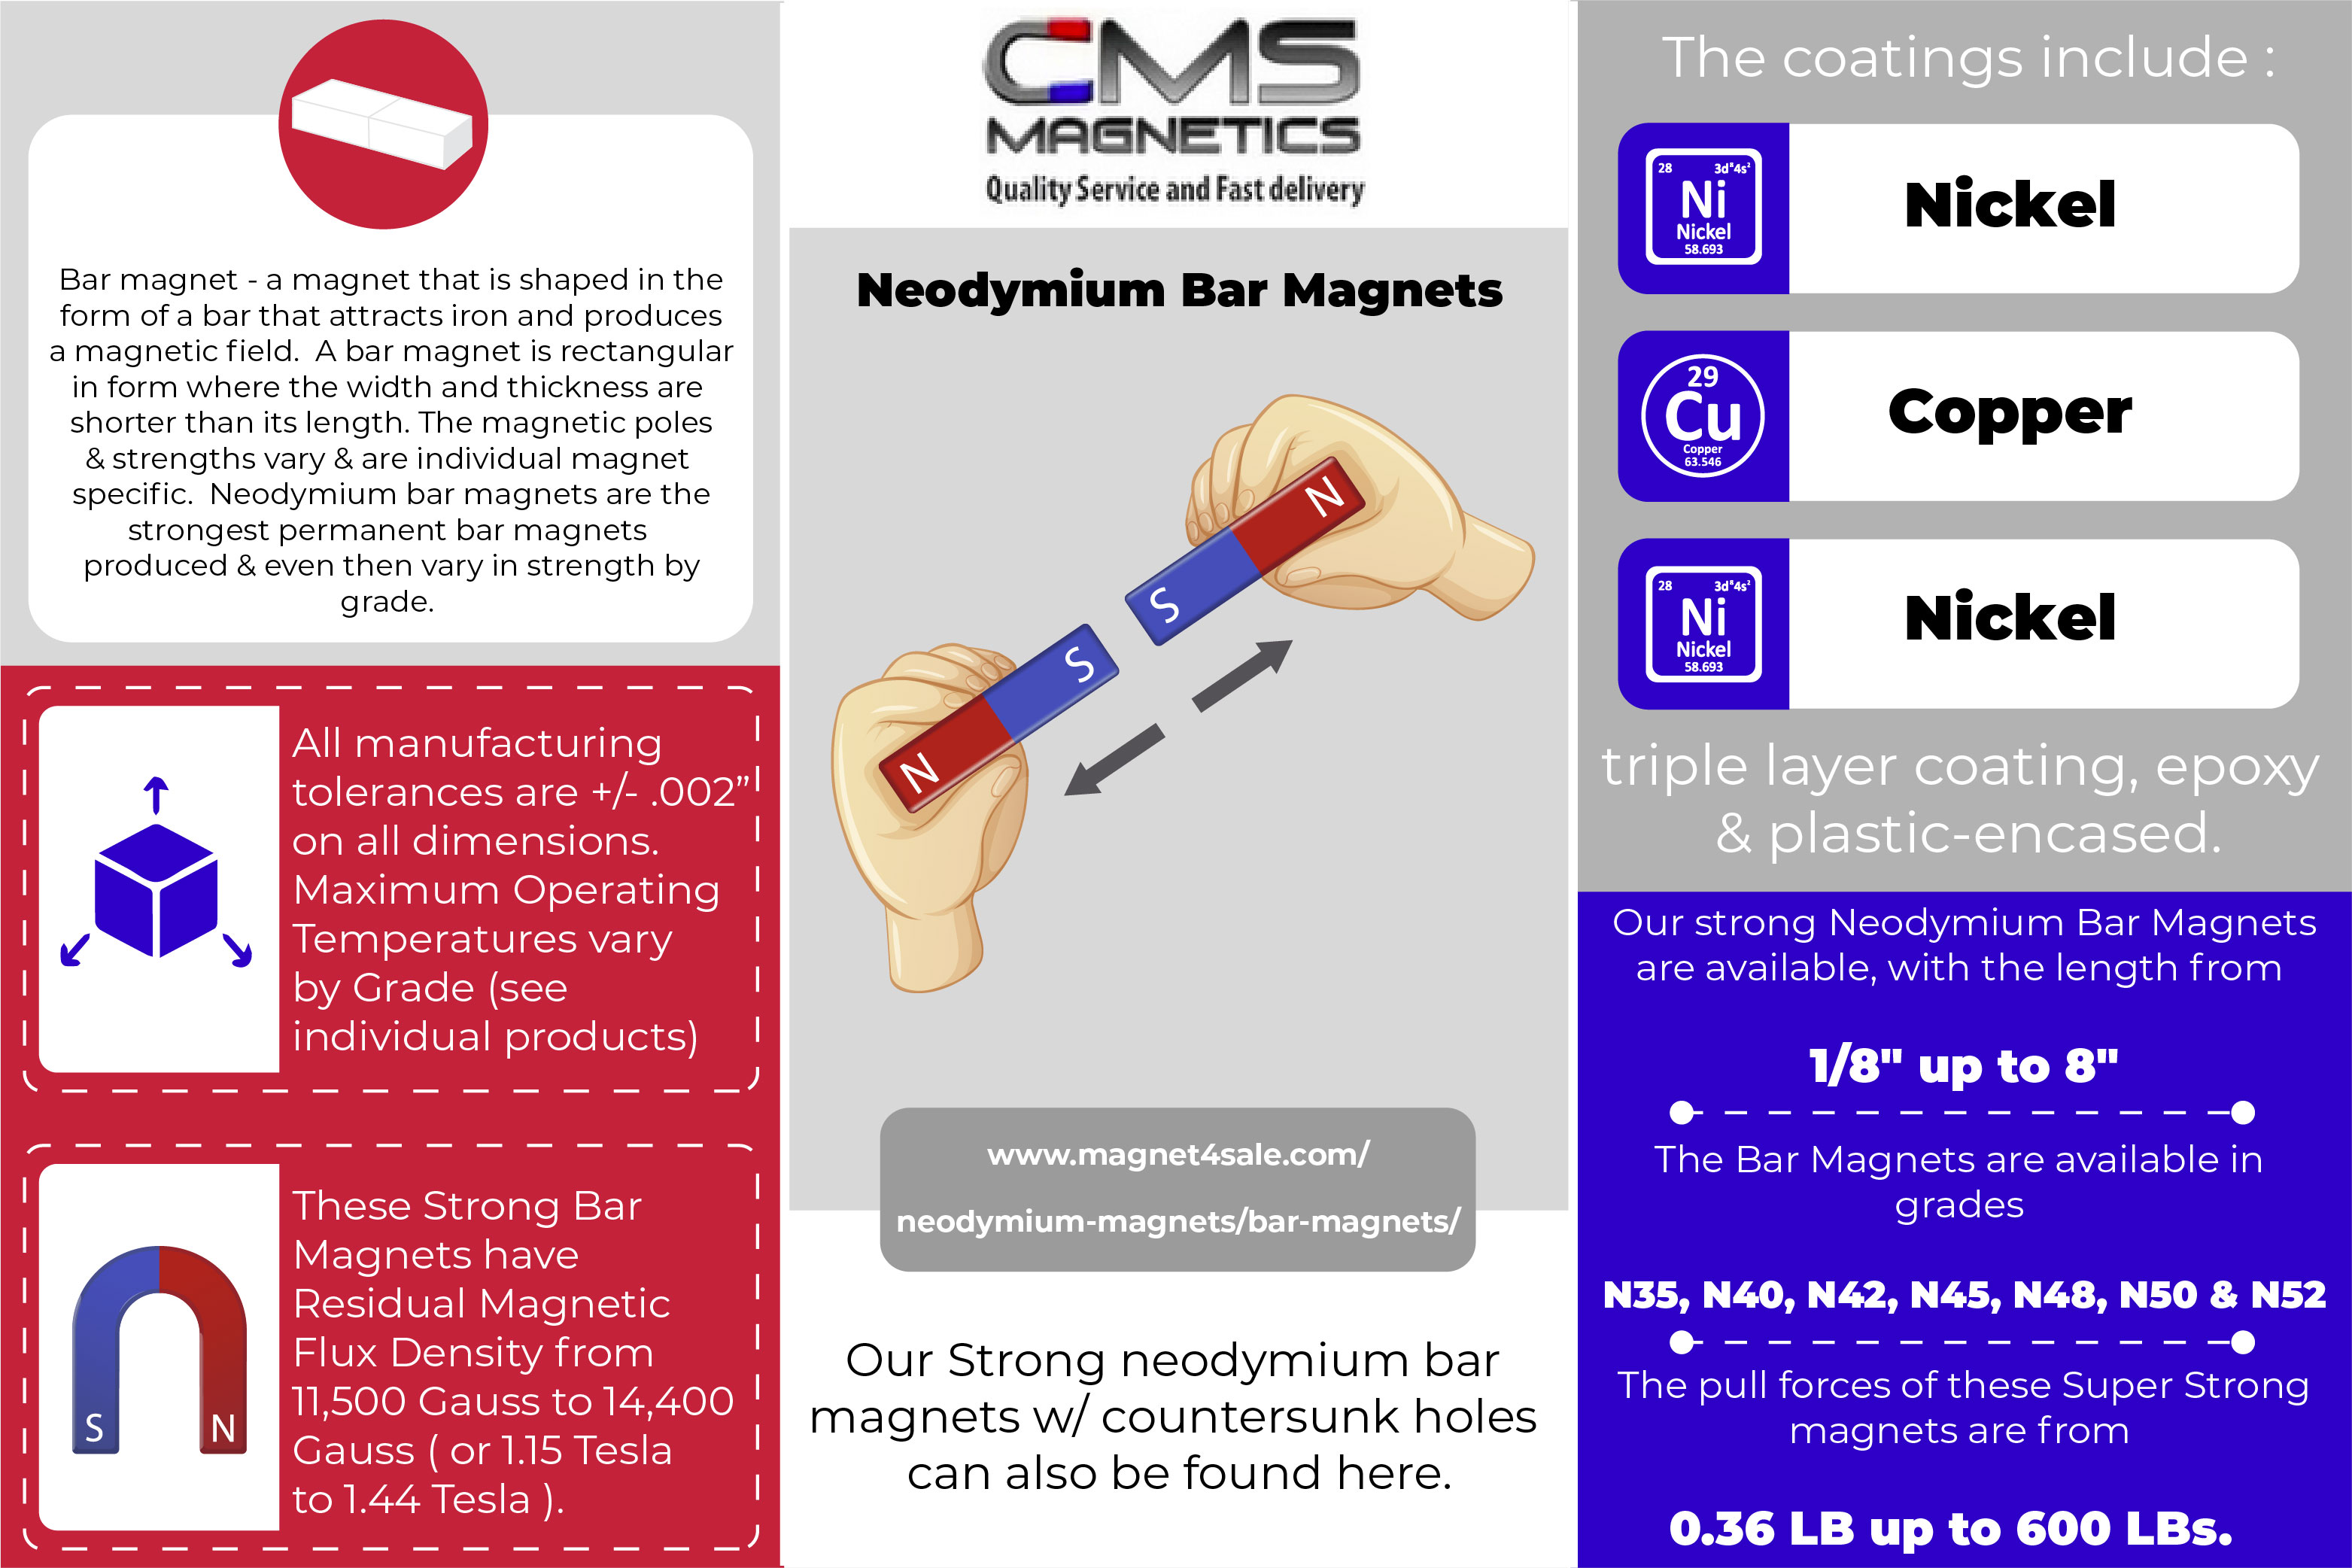 What You Should Know About Bar Magnets - CMS Magnetics